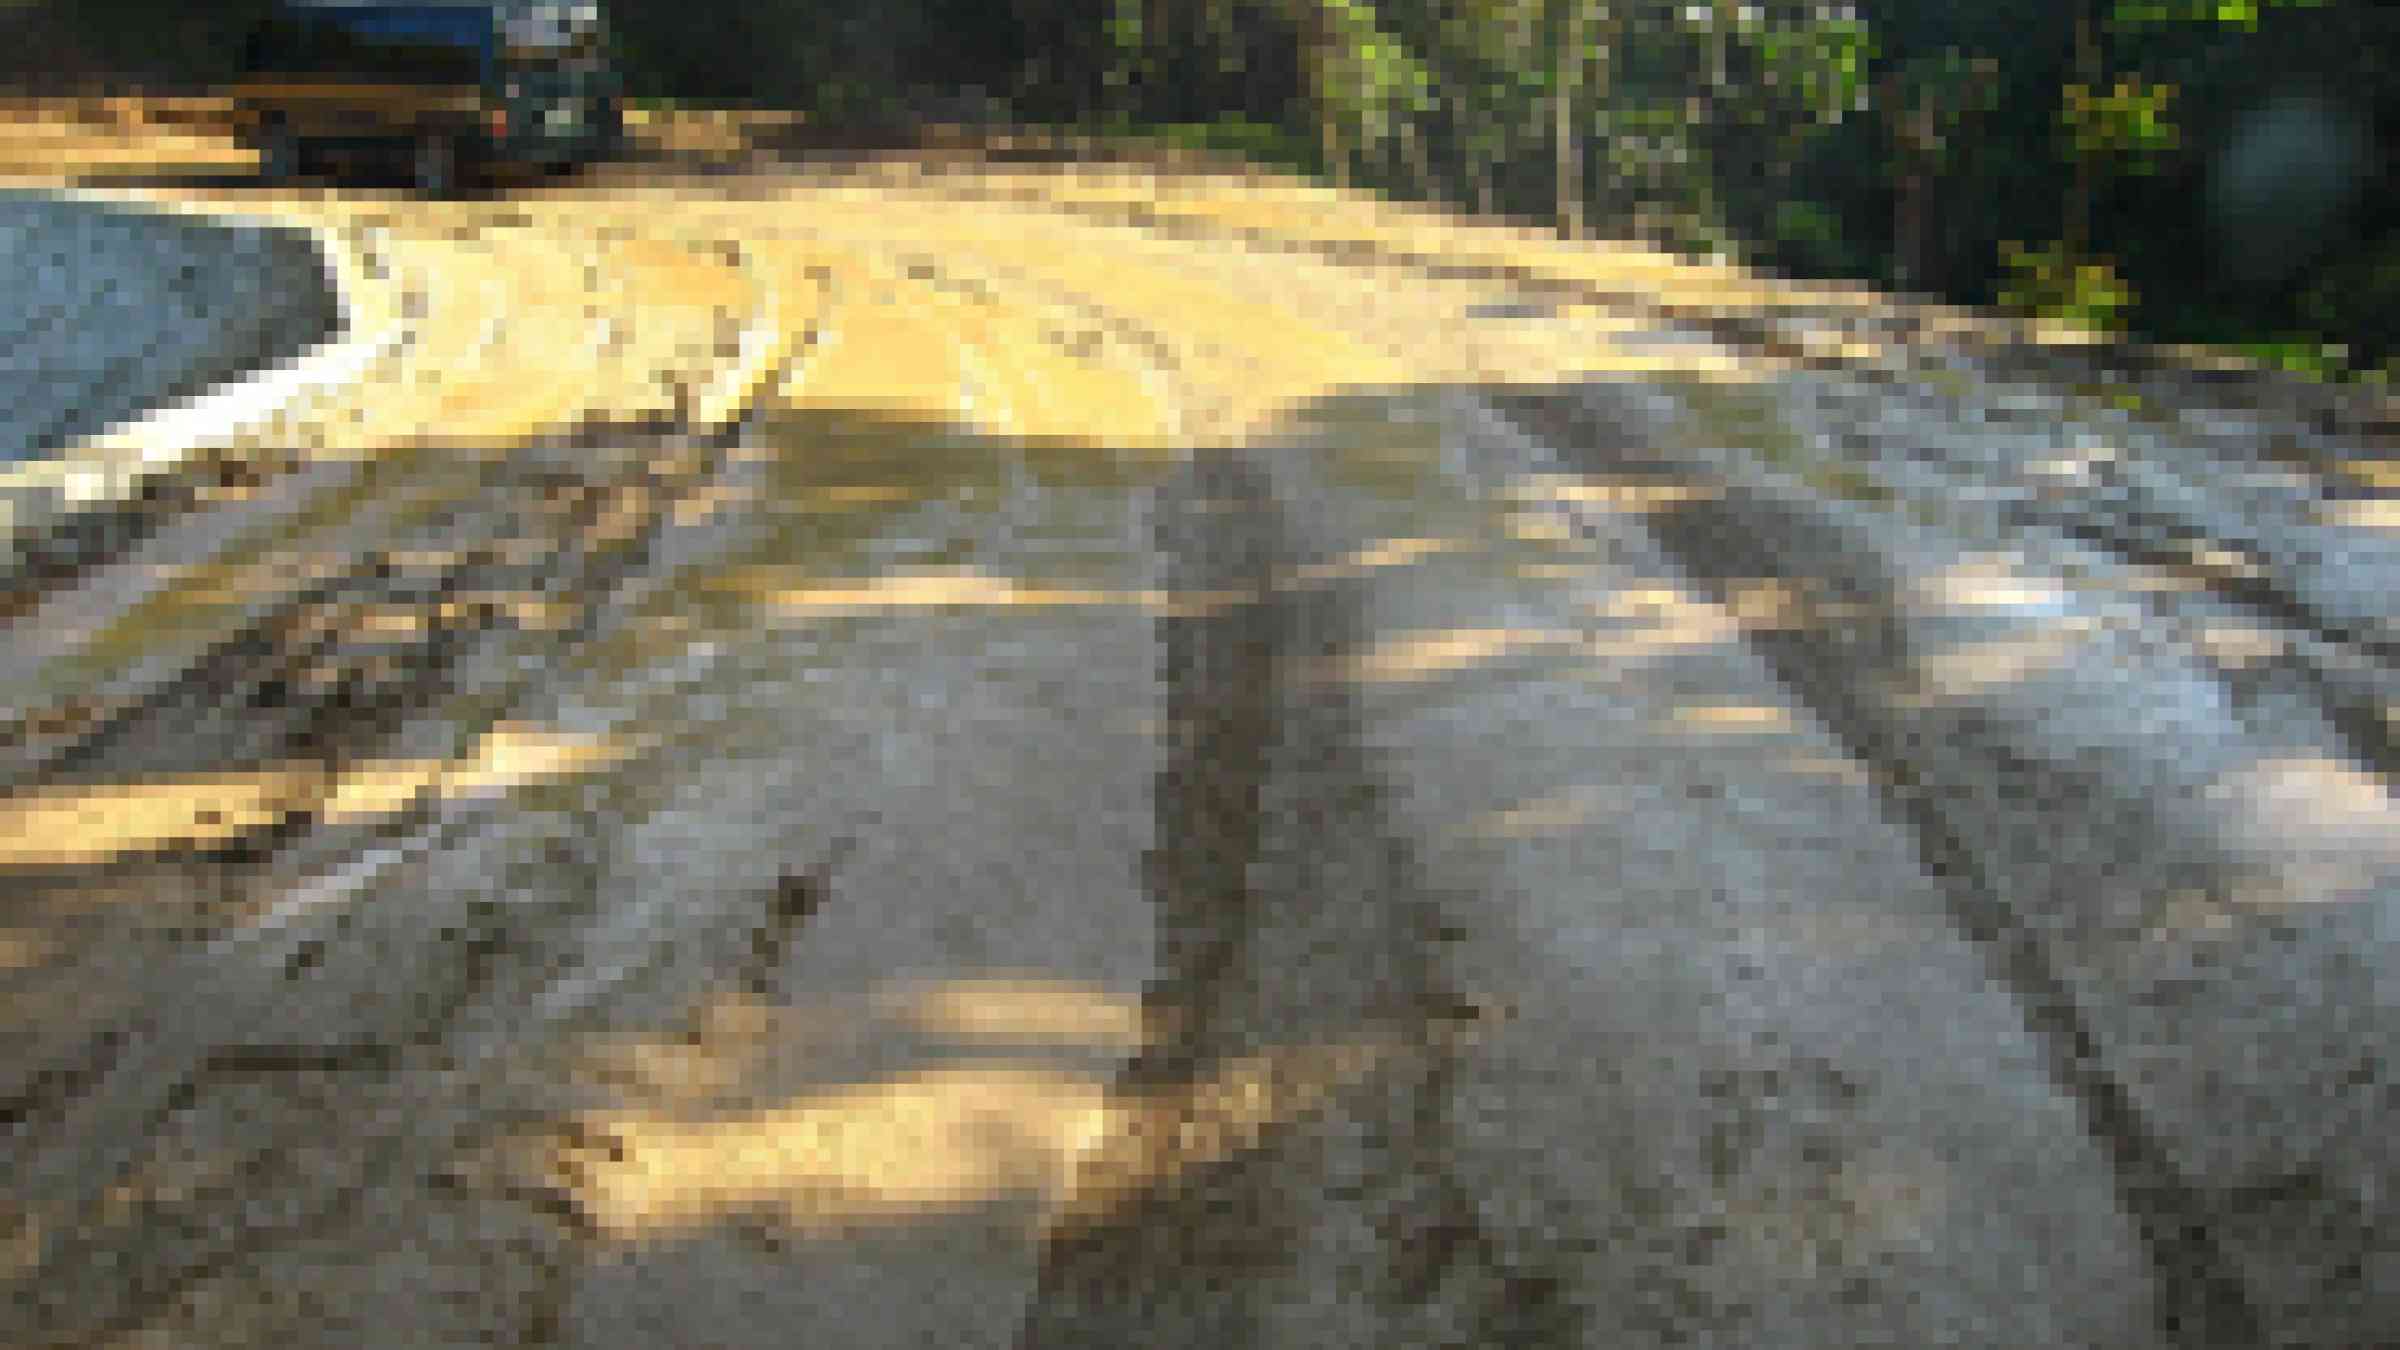 Philippines mud road; photo by flickr user erasmusa, creative commones attribution attribution-noncommercial-share alike 2.0 generic